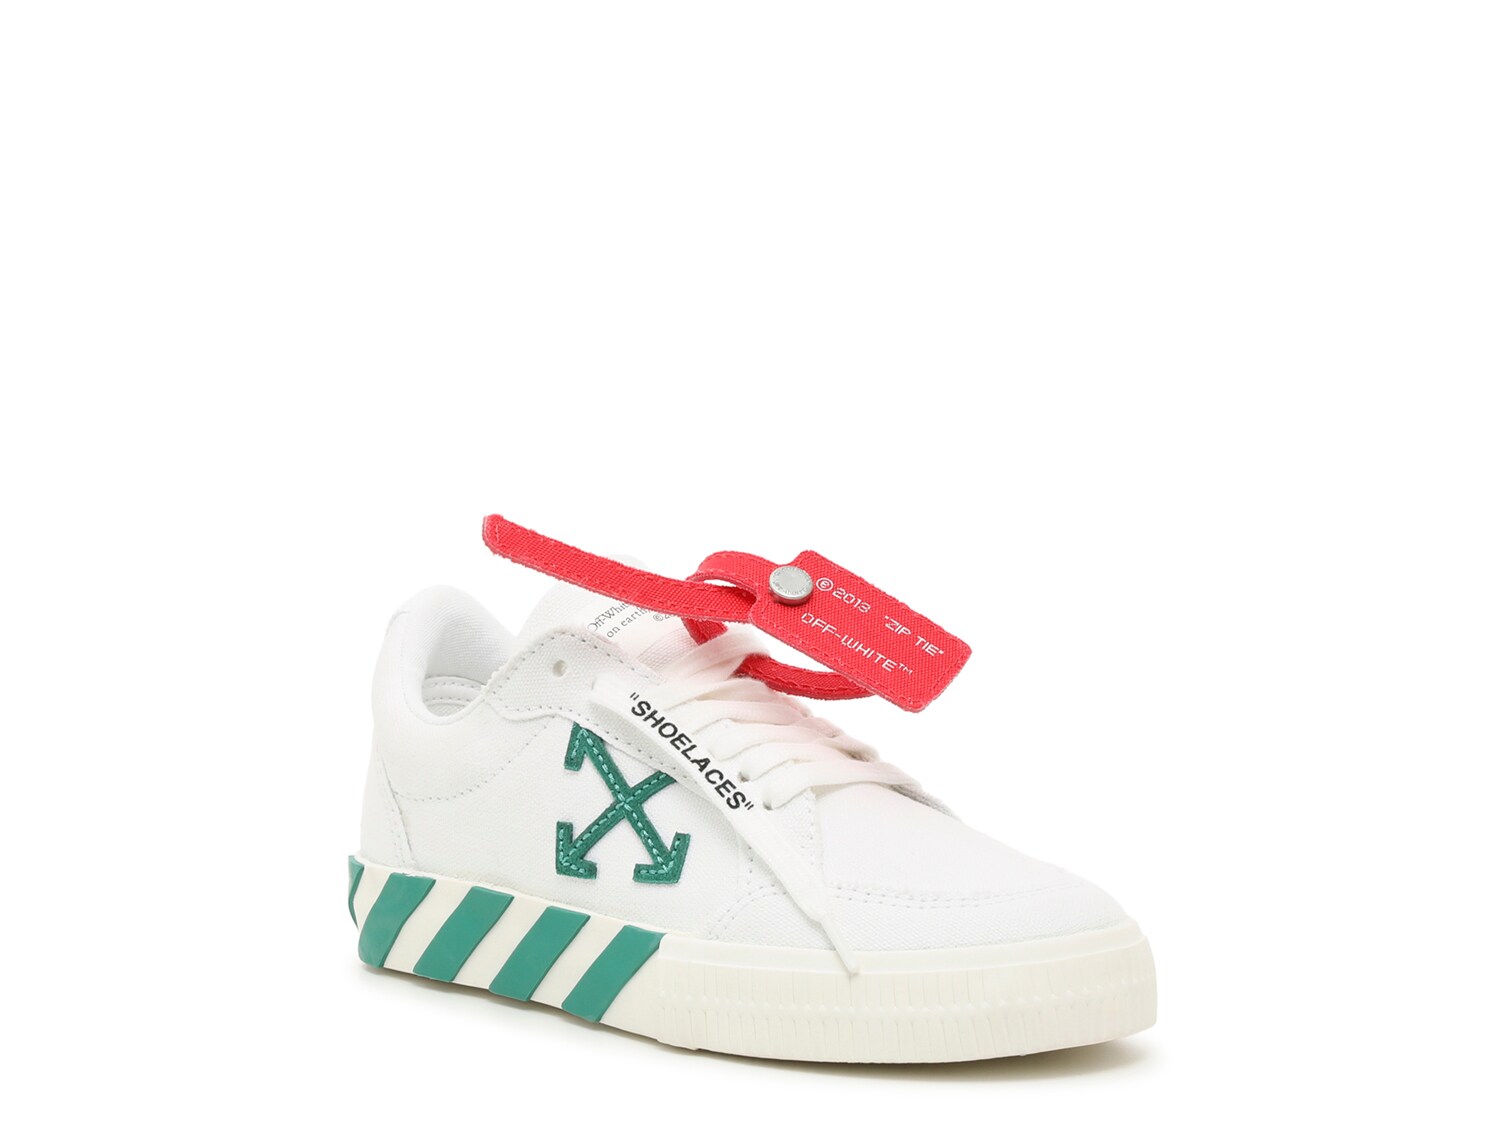 Кроссовки Off White Vulcanized Lace-Up, белый/зеленый кроссовки next signature lace up white with rose gold